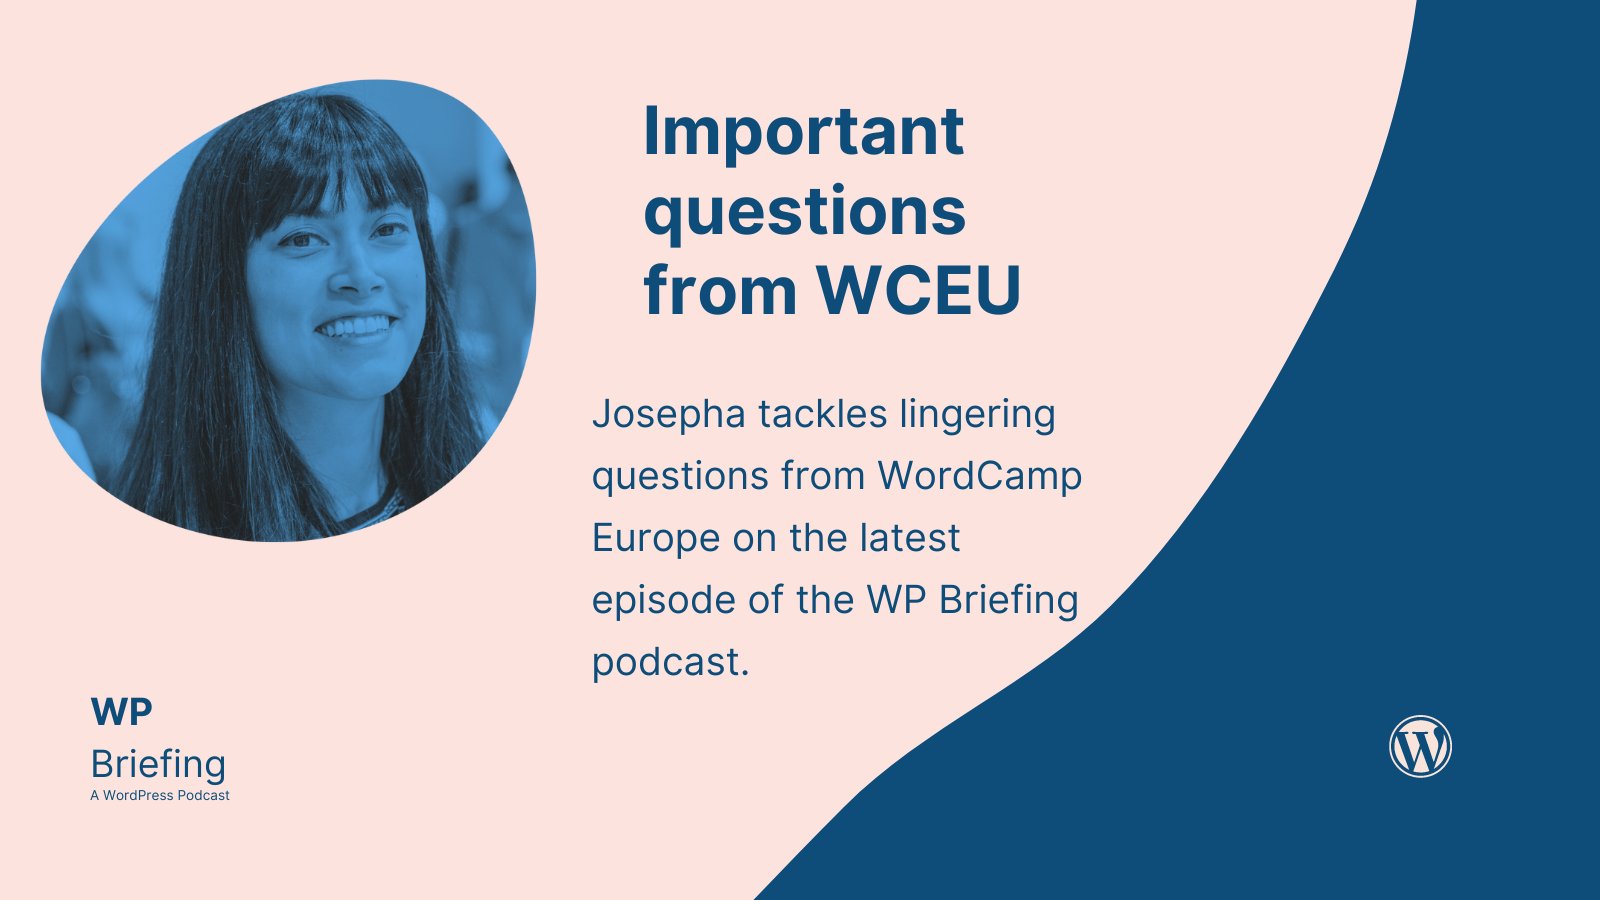 Pink and blue image card with photo of Josepha Haden Chomphosy, and text, "Important questions from WCEU. Josepha tackles lingering questions from WordCamp Europe on the latest wpisode of the WP Briefing podcast."